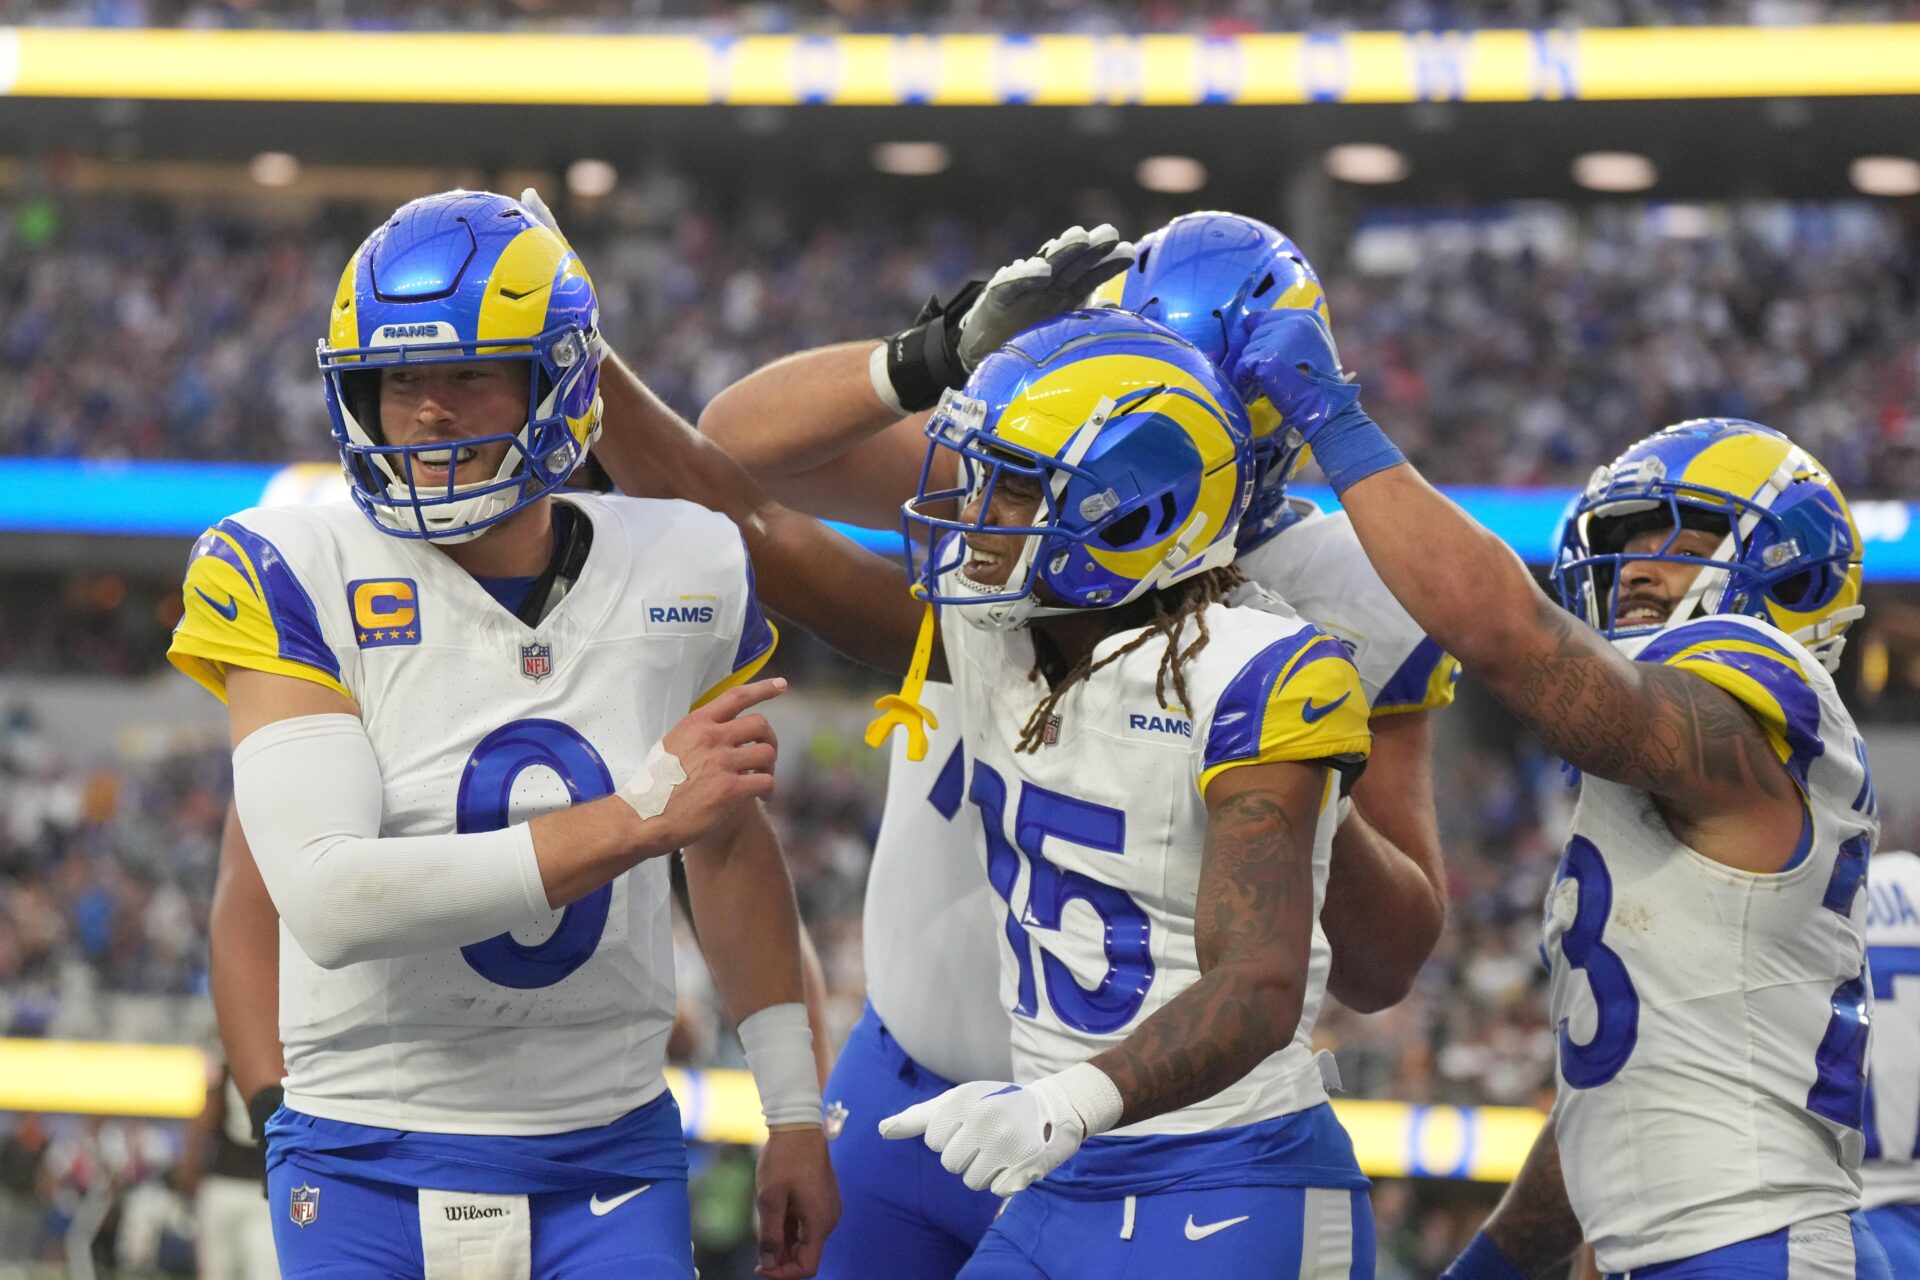 Los Angeles Rams wide receiver Demarcus Robinson (15) celebrates with quarterback Matthew Stafford (9) and running back Kyren Williams (23) after catching a 7-yard touchdown pass in the third quarter against the Cleveland Browns at SoFi Stadium.